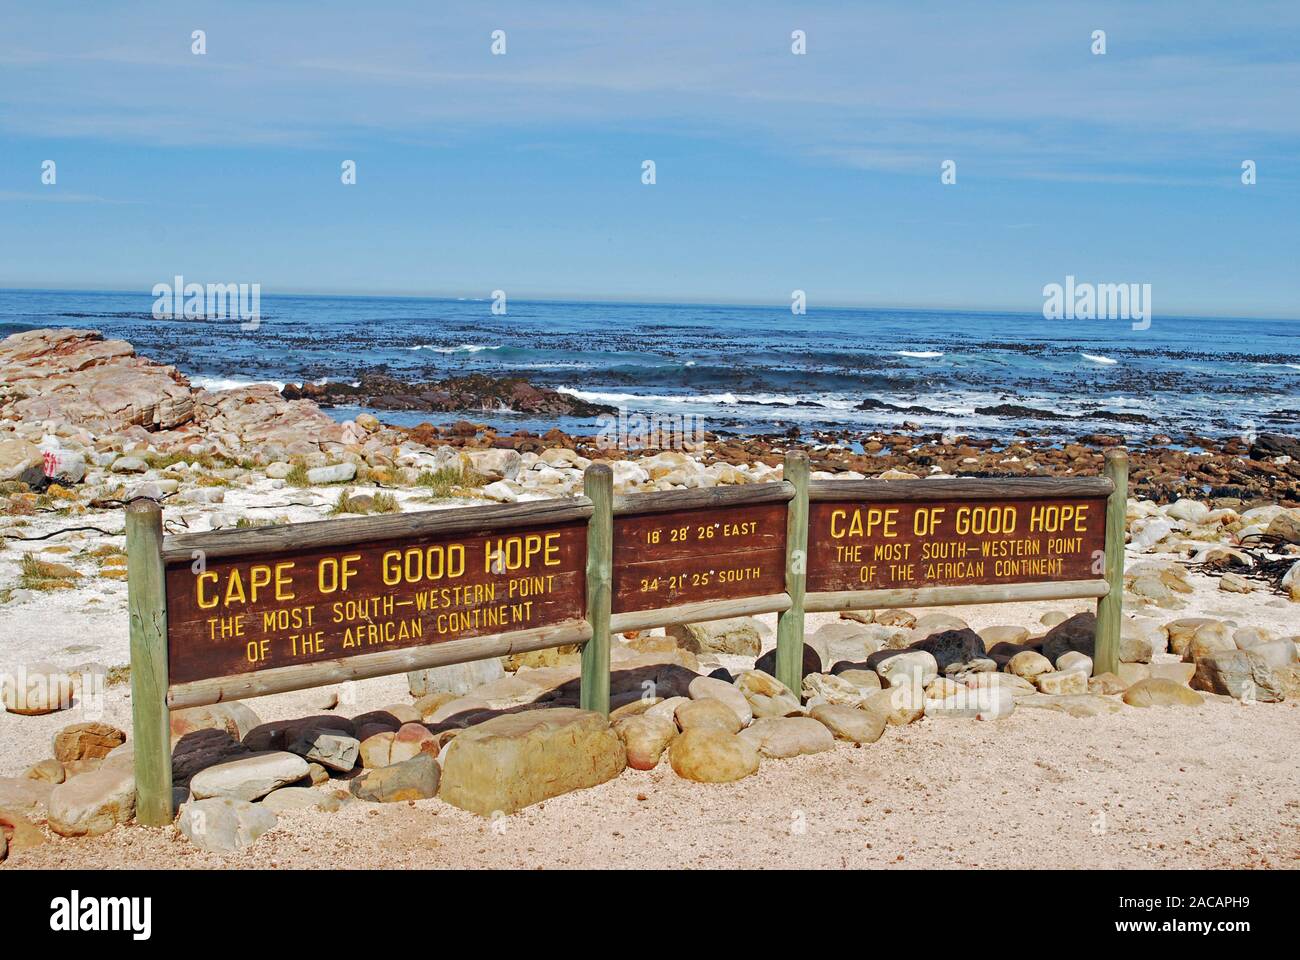 Cape of Good Hope, sign, South Africa, Africa Stock Photo